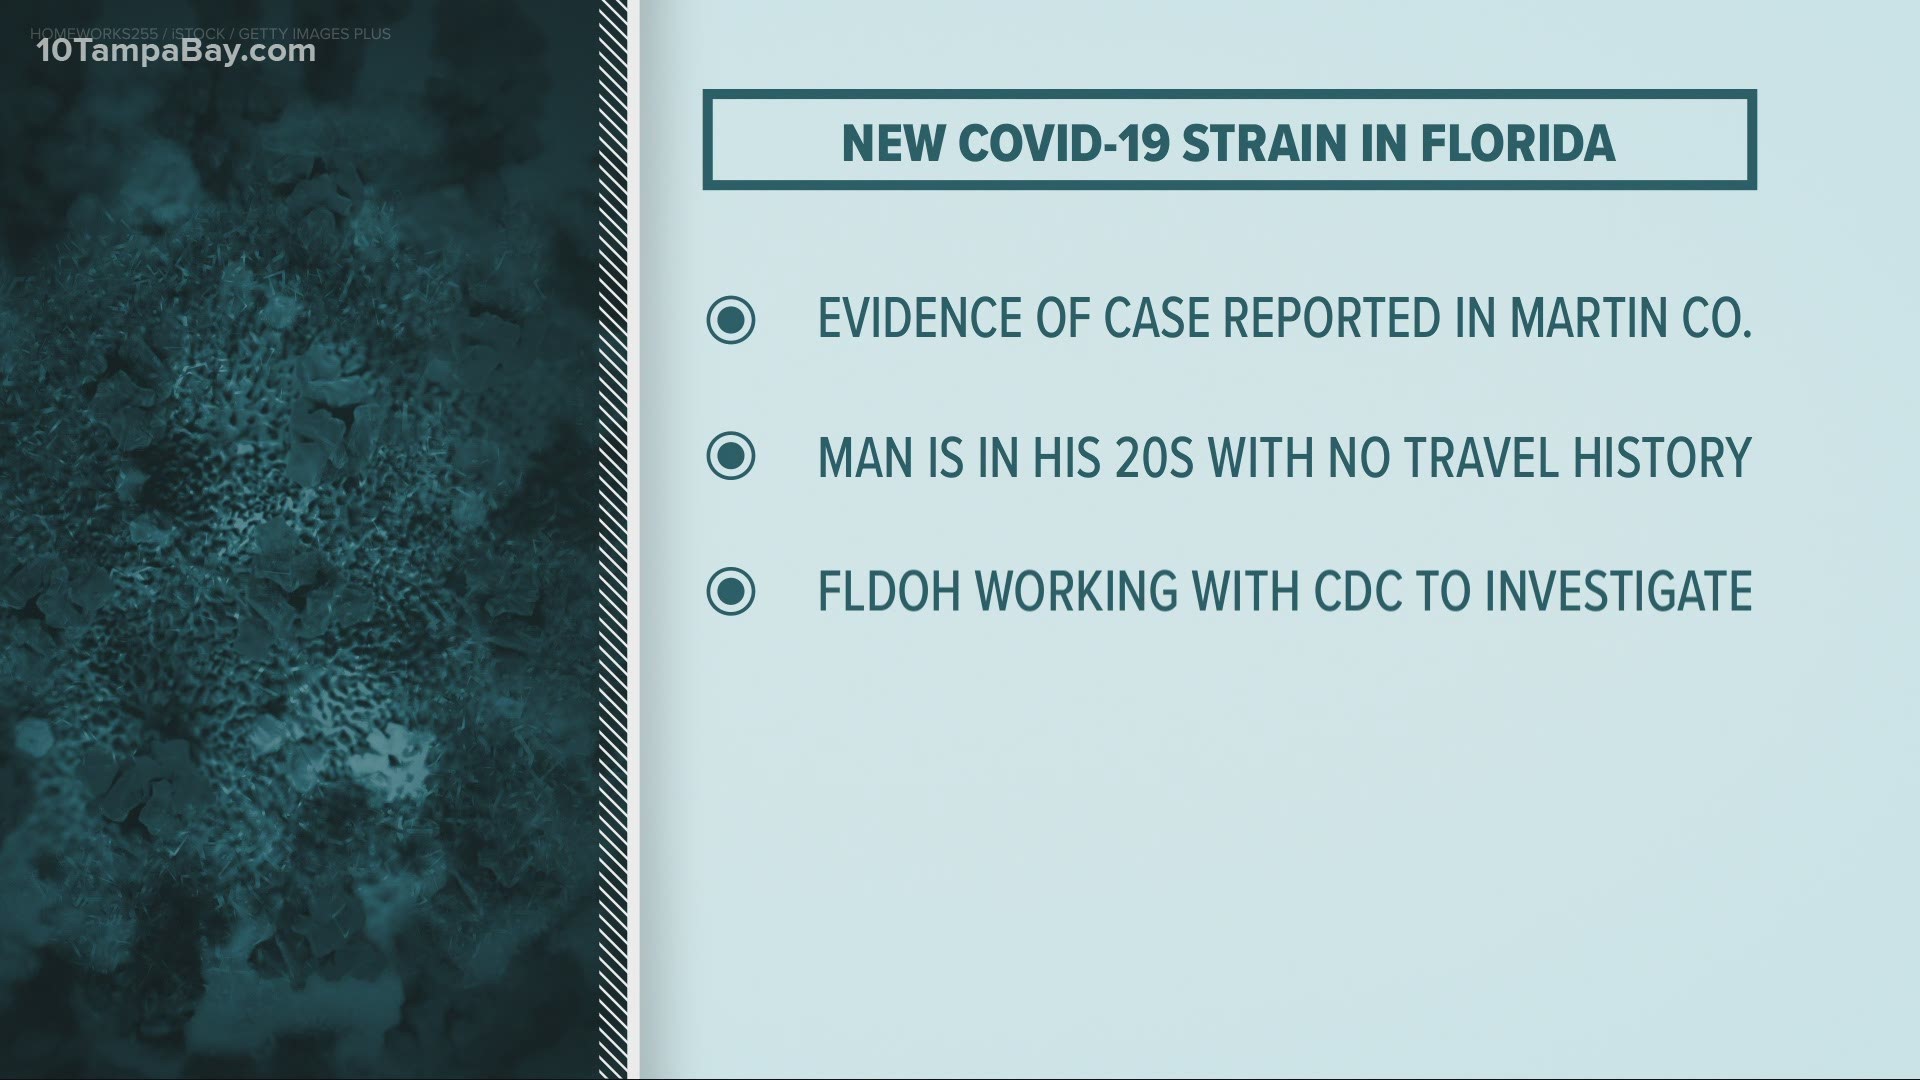 The Florida Department of Health is working with the CDC on the investigation.